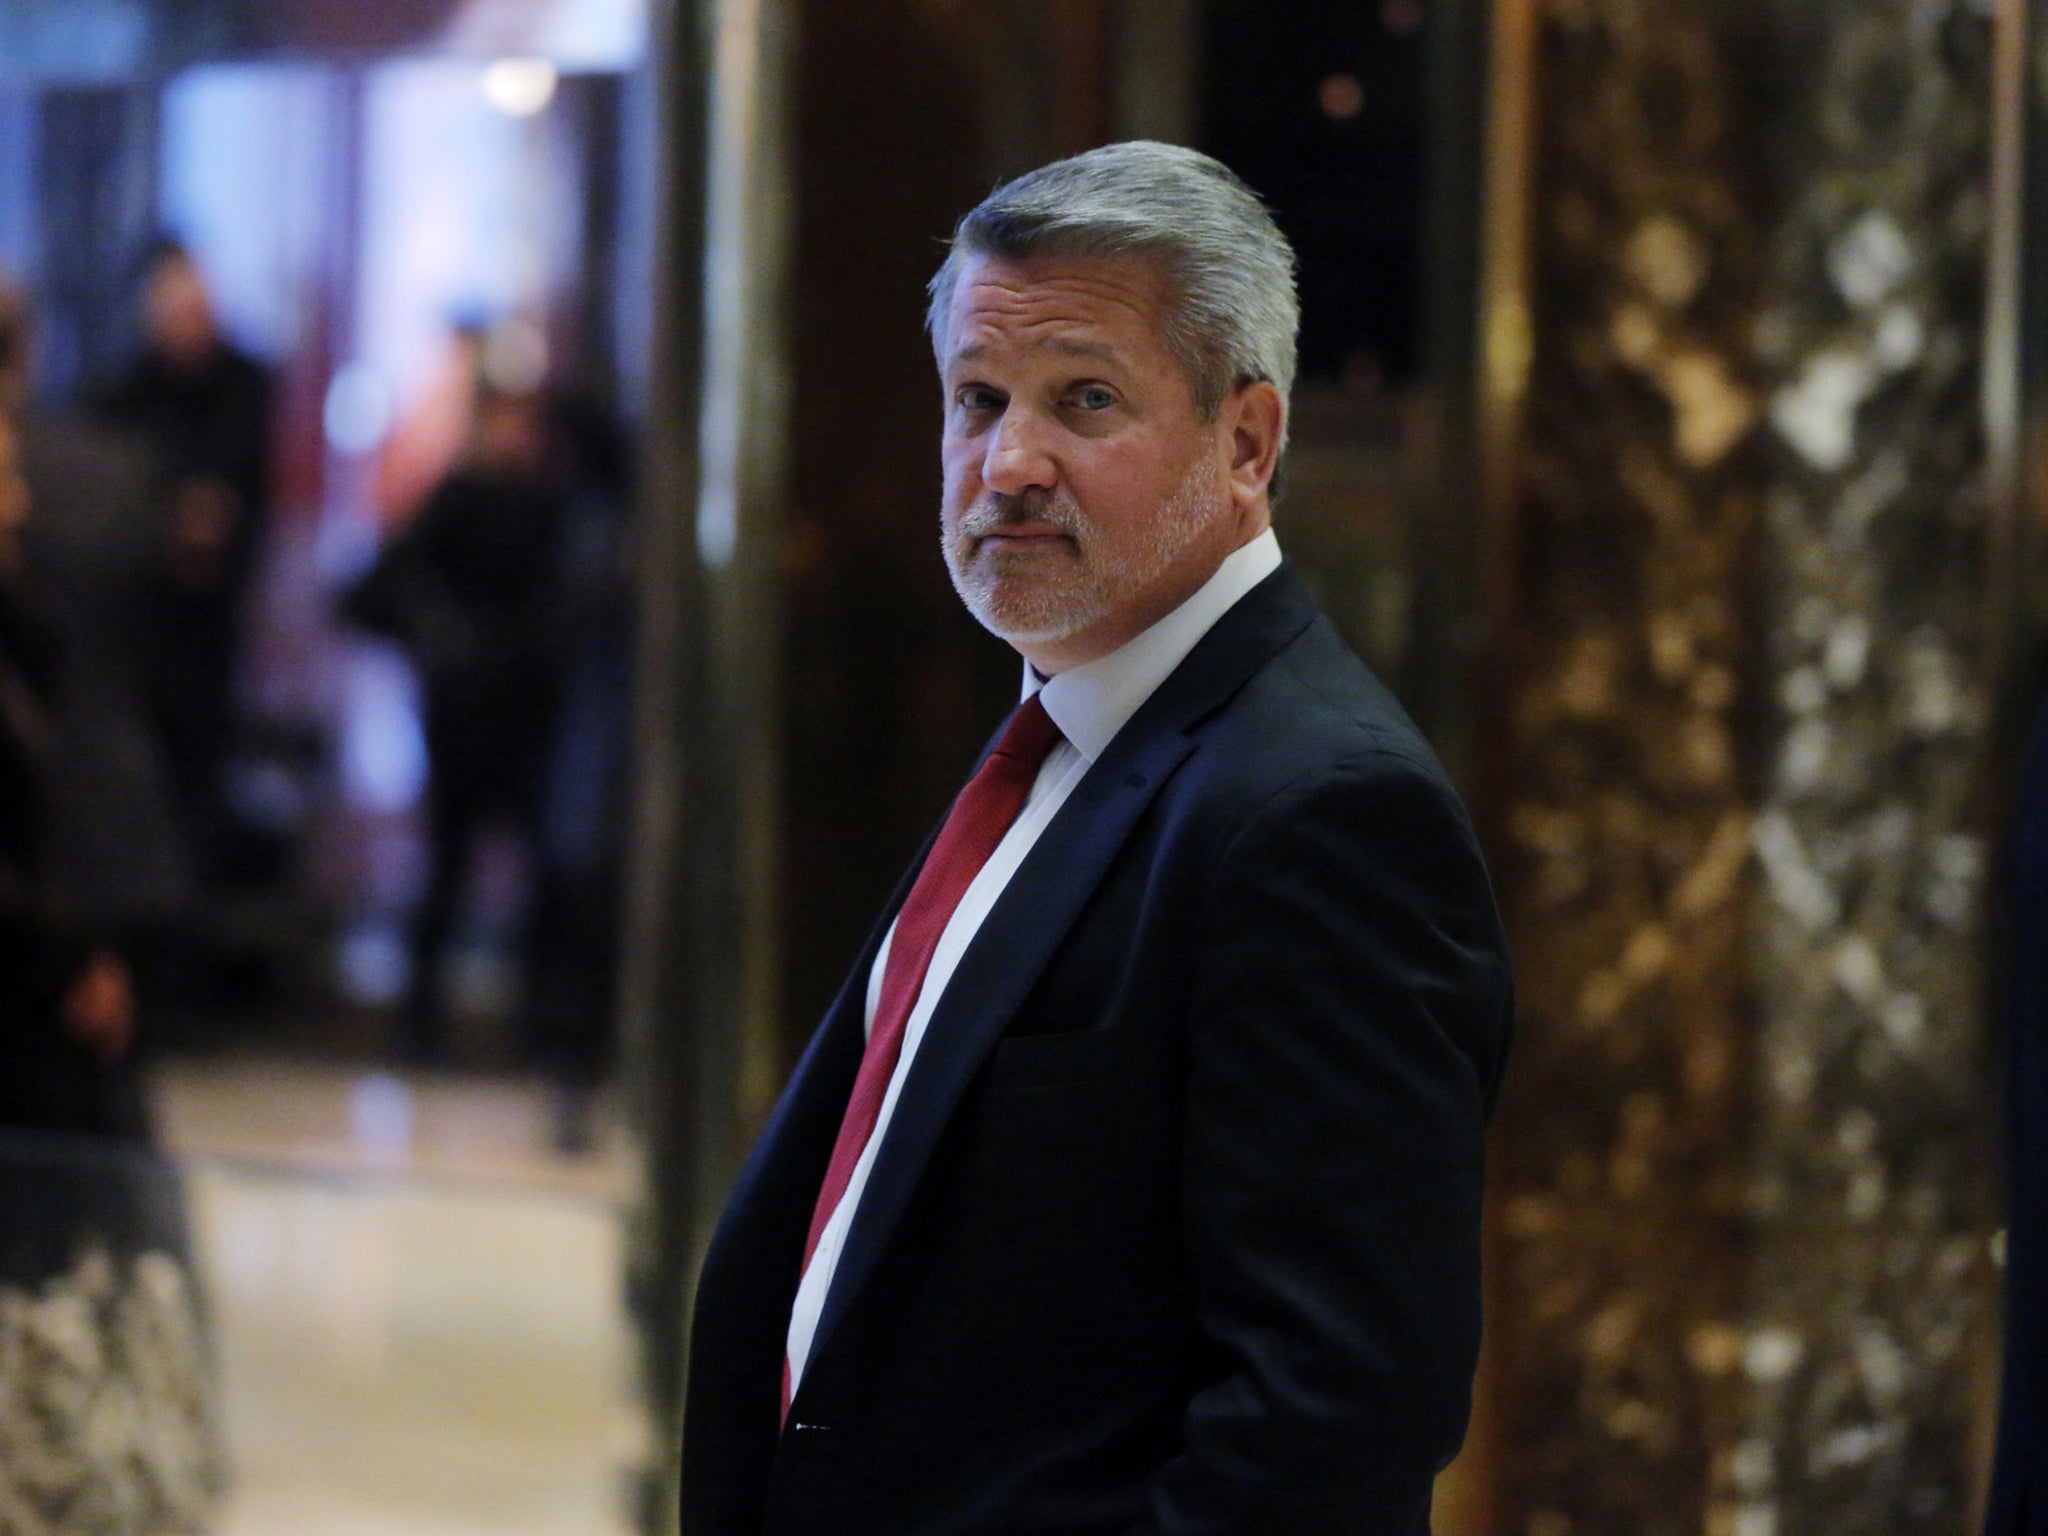 Bill Shine served as co-president at Fox News until he was forced out over allegations he enabled alleged sexual harassment